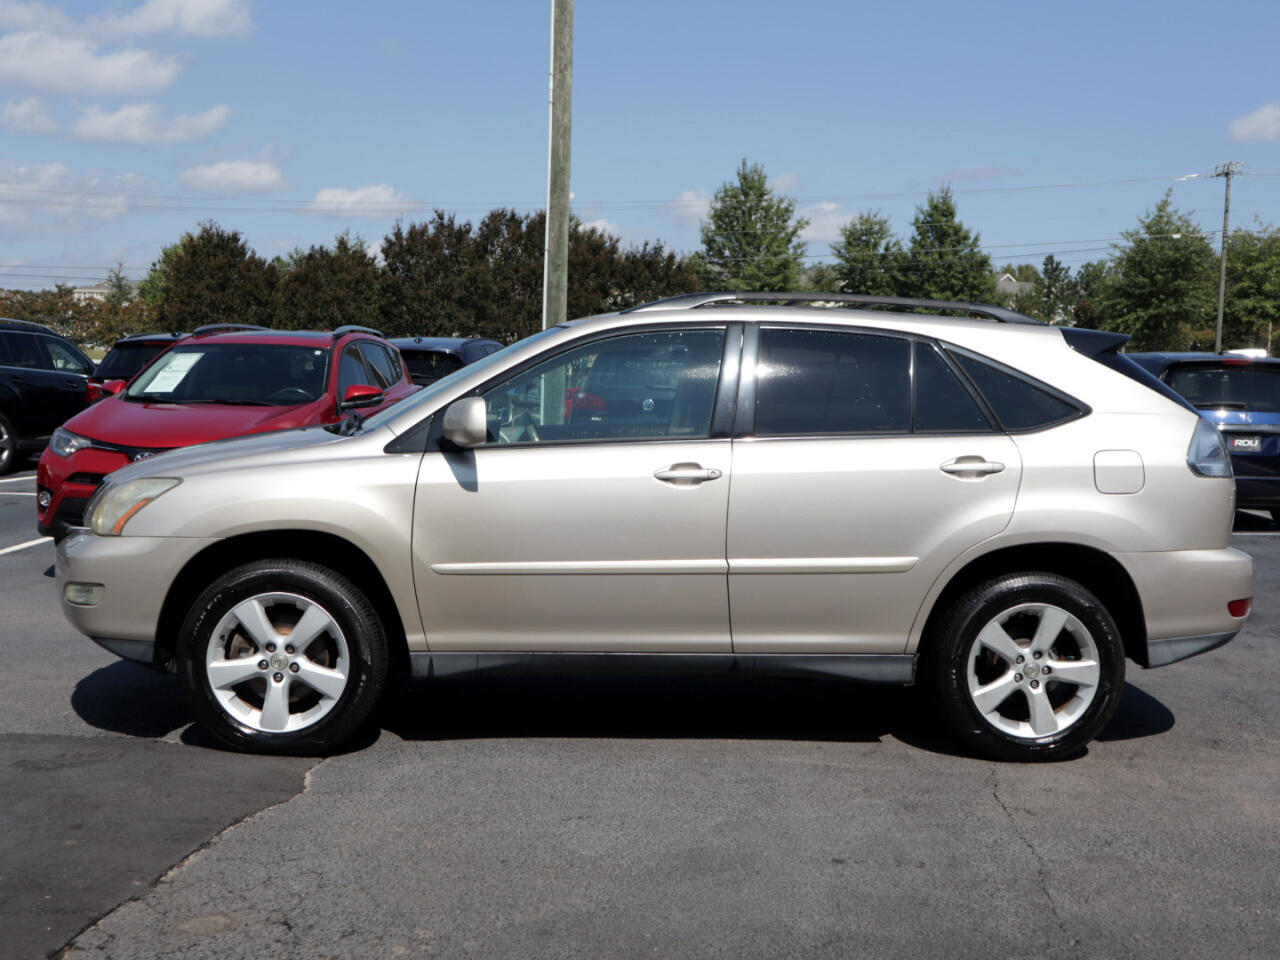 PreOwned 2007 Lexus RX 350 AWD SUV in Raleigh 002333